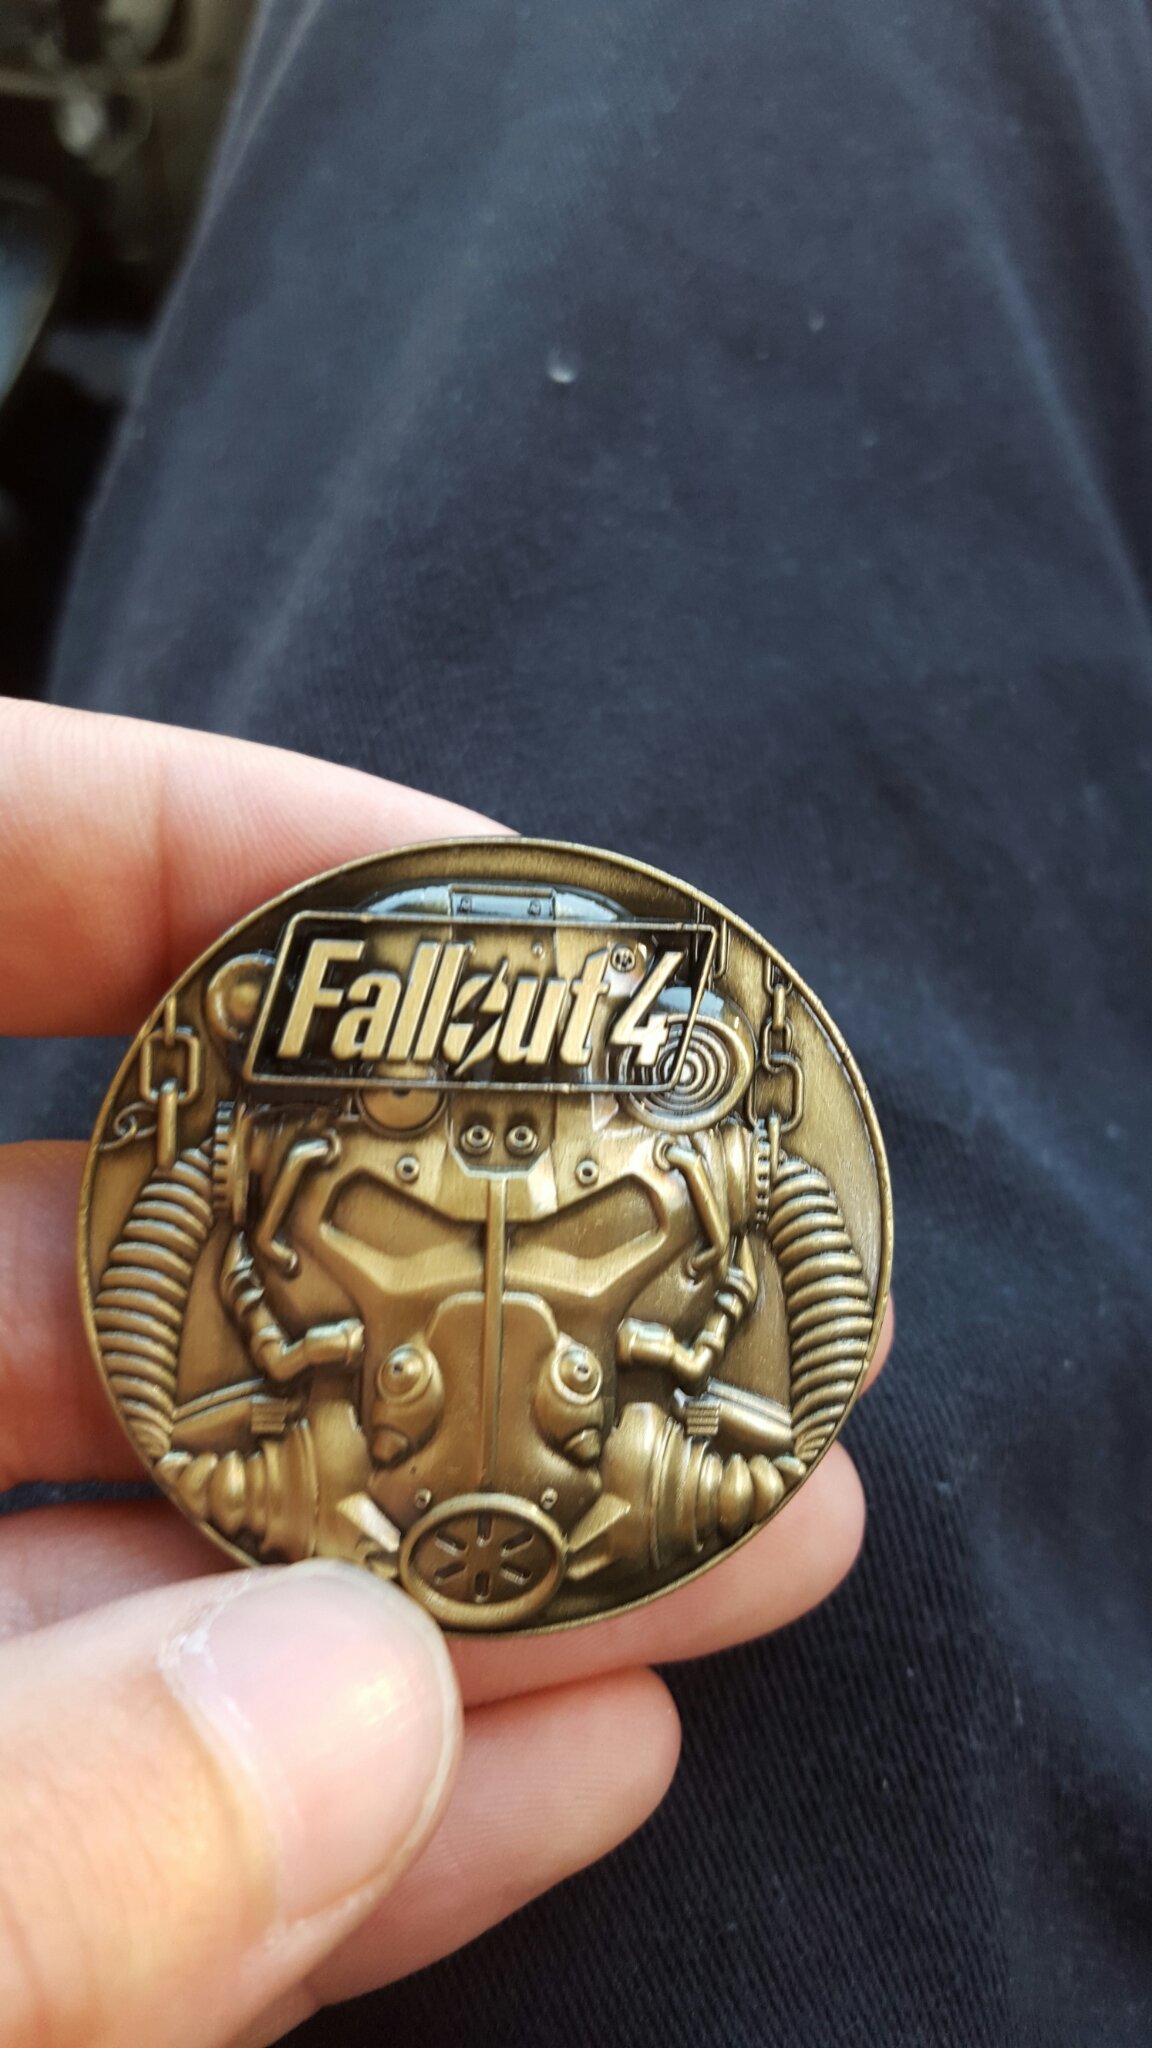 IT CAME WITH A CHALLENGE COIN - meme